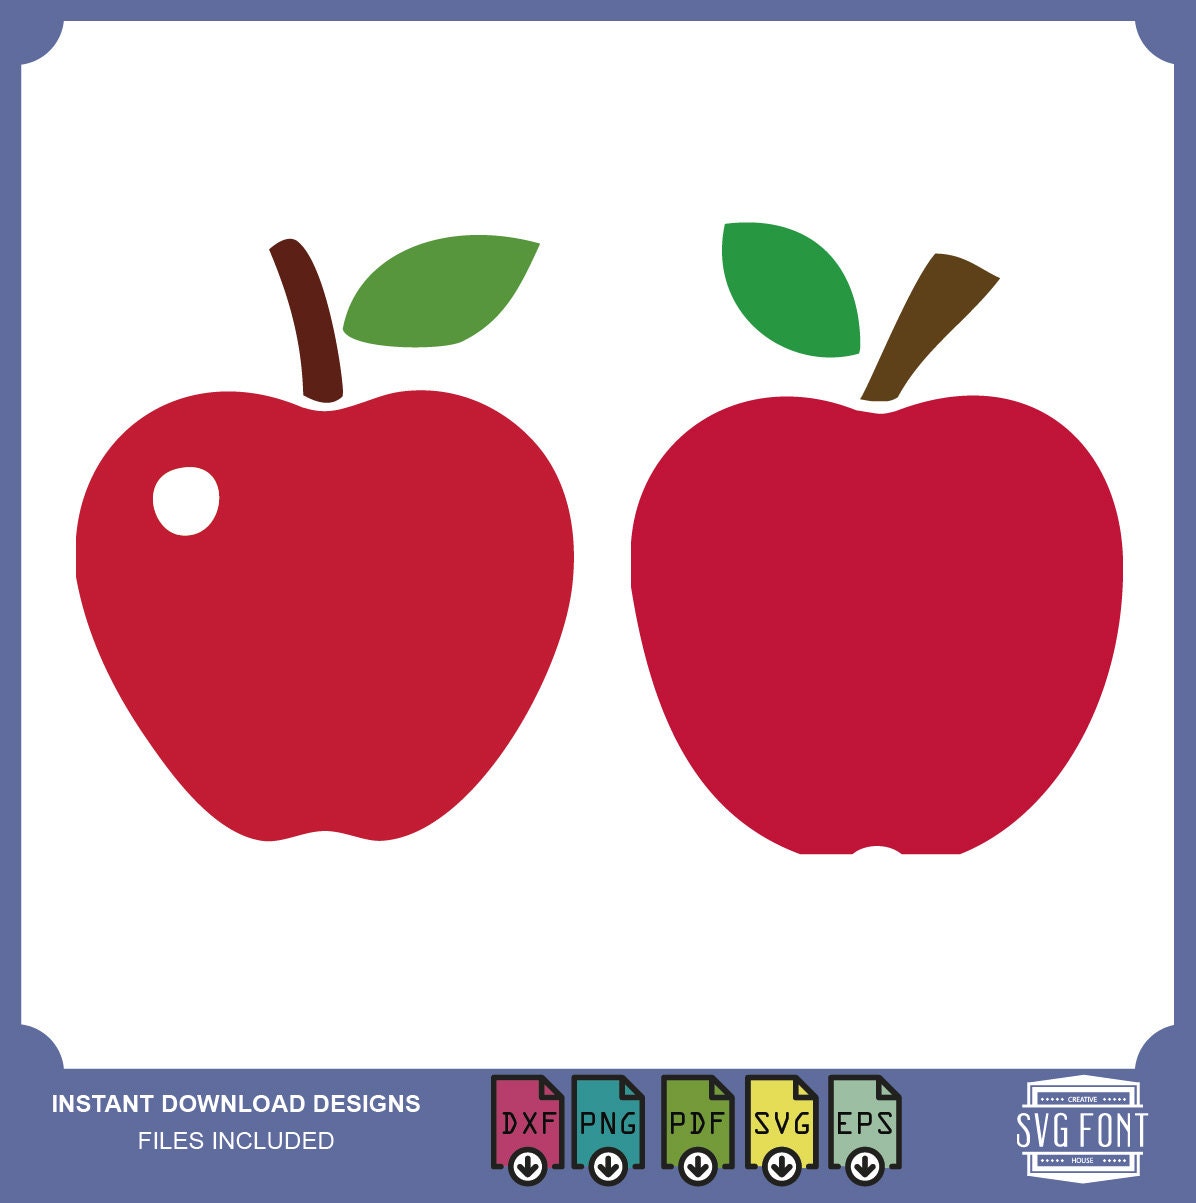 Download Apple svg clipart fruit teacher Apple Files For Use With